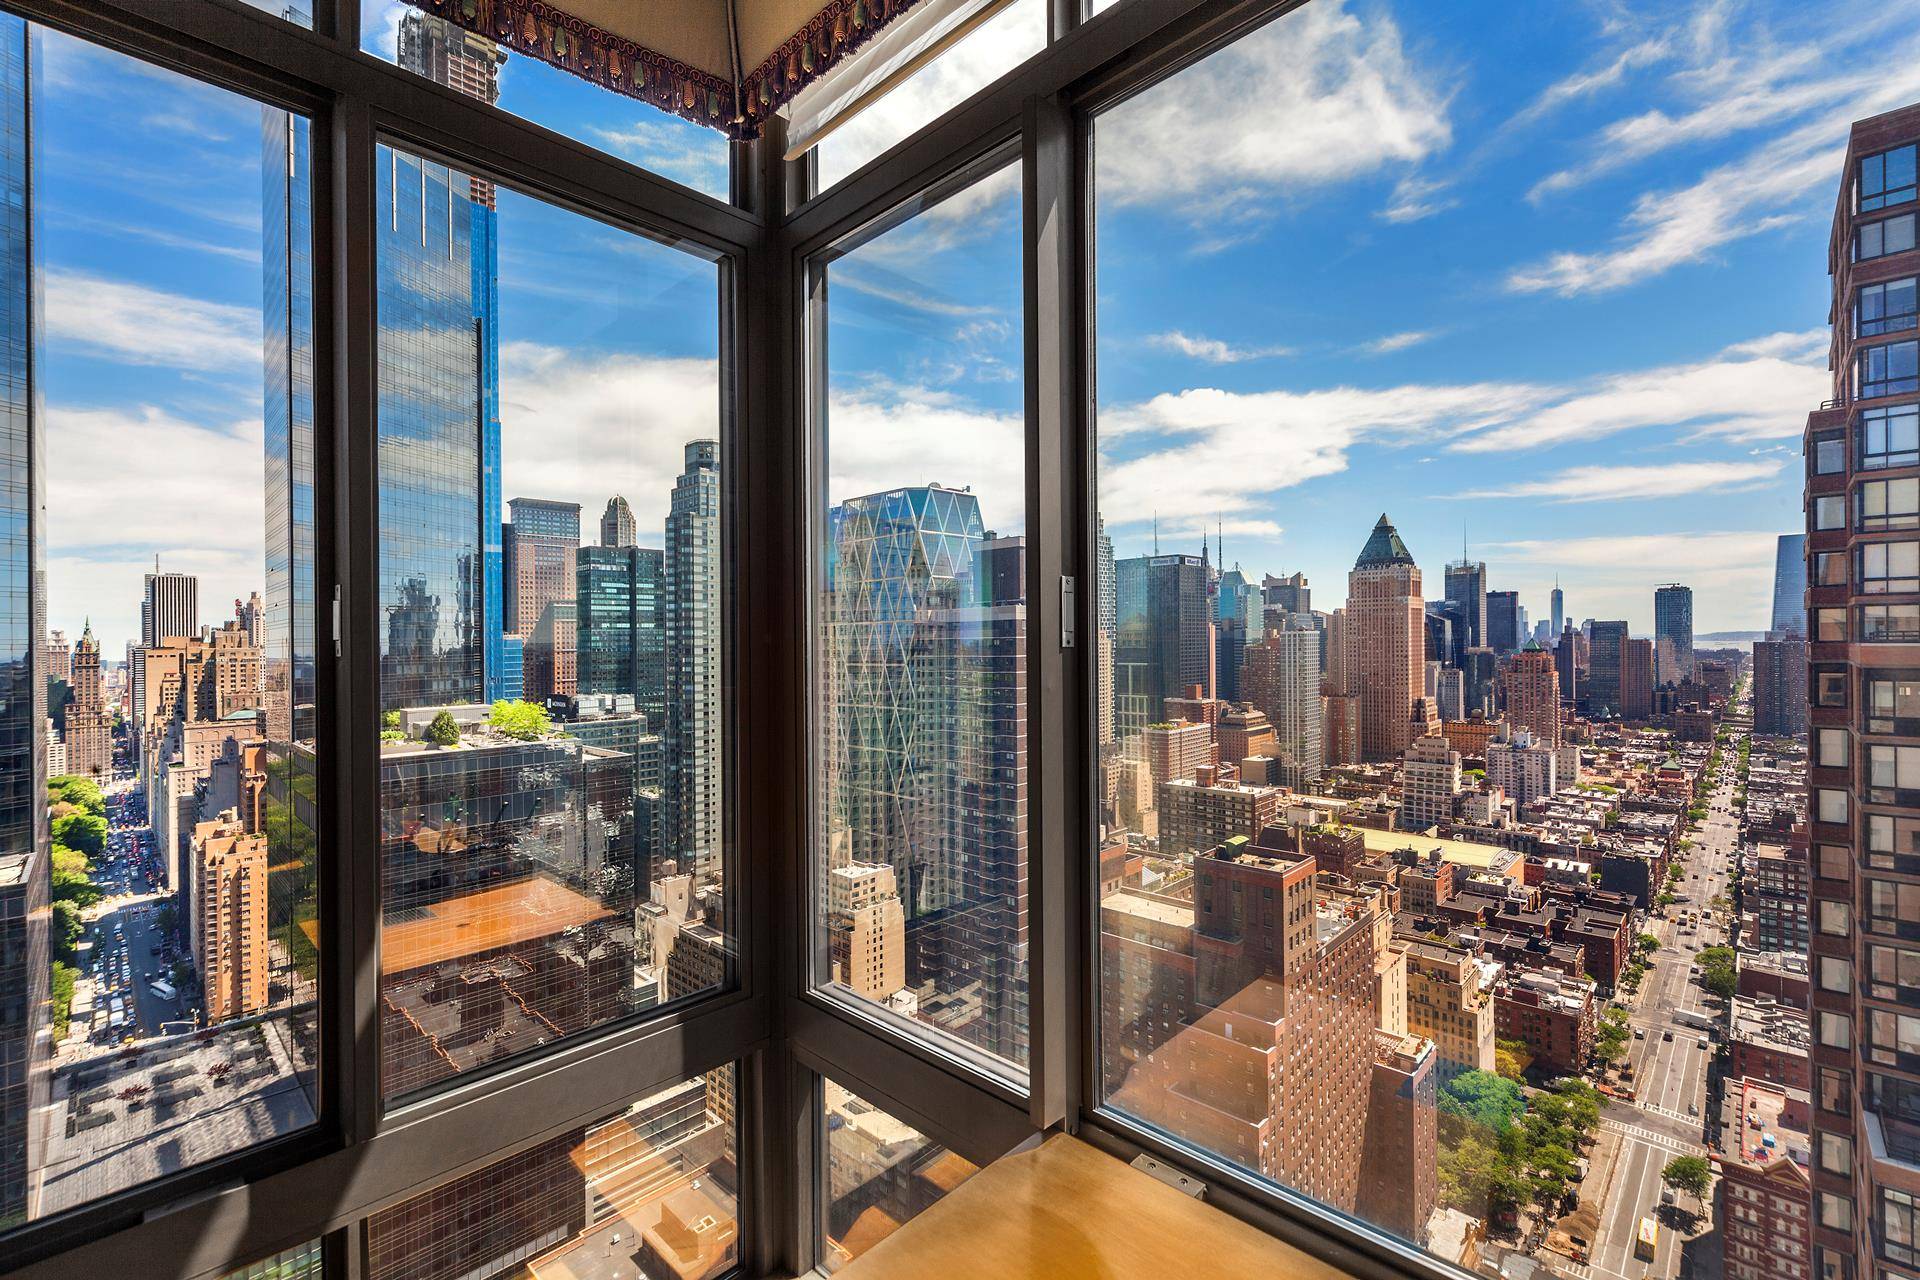 Experience luxury living at Penthouse C, located at 2 Columbus Avenue, a full service white glove condominium in the heart of New York City just steps from Central Park.